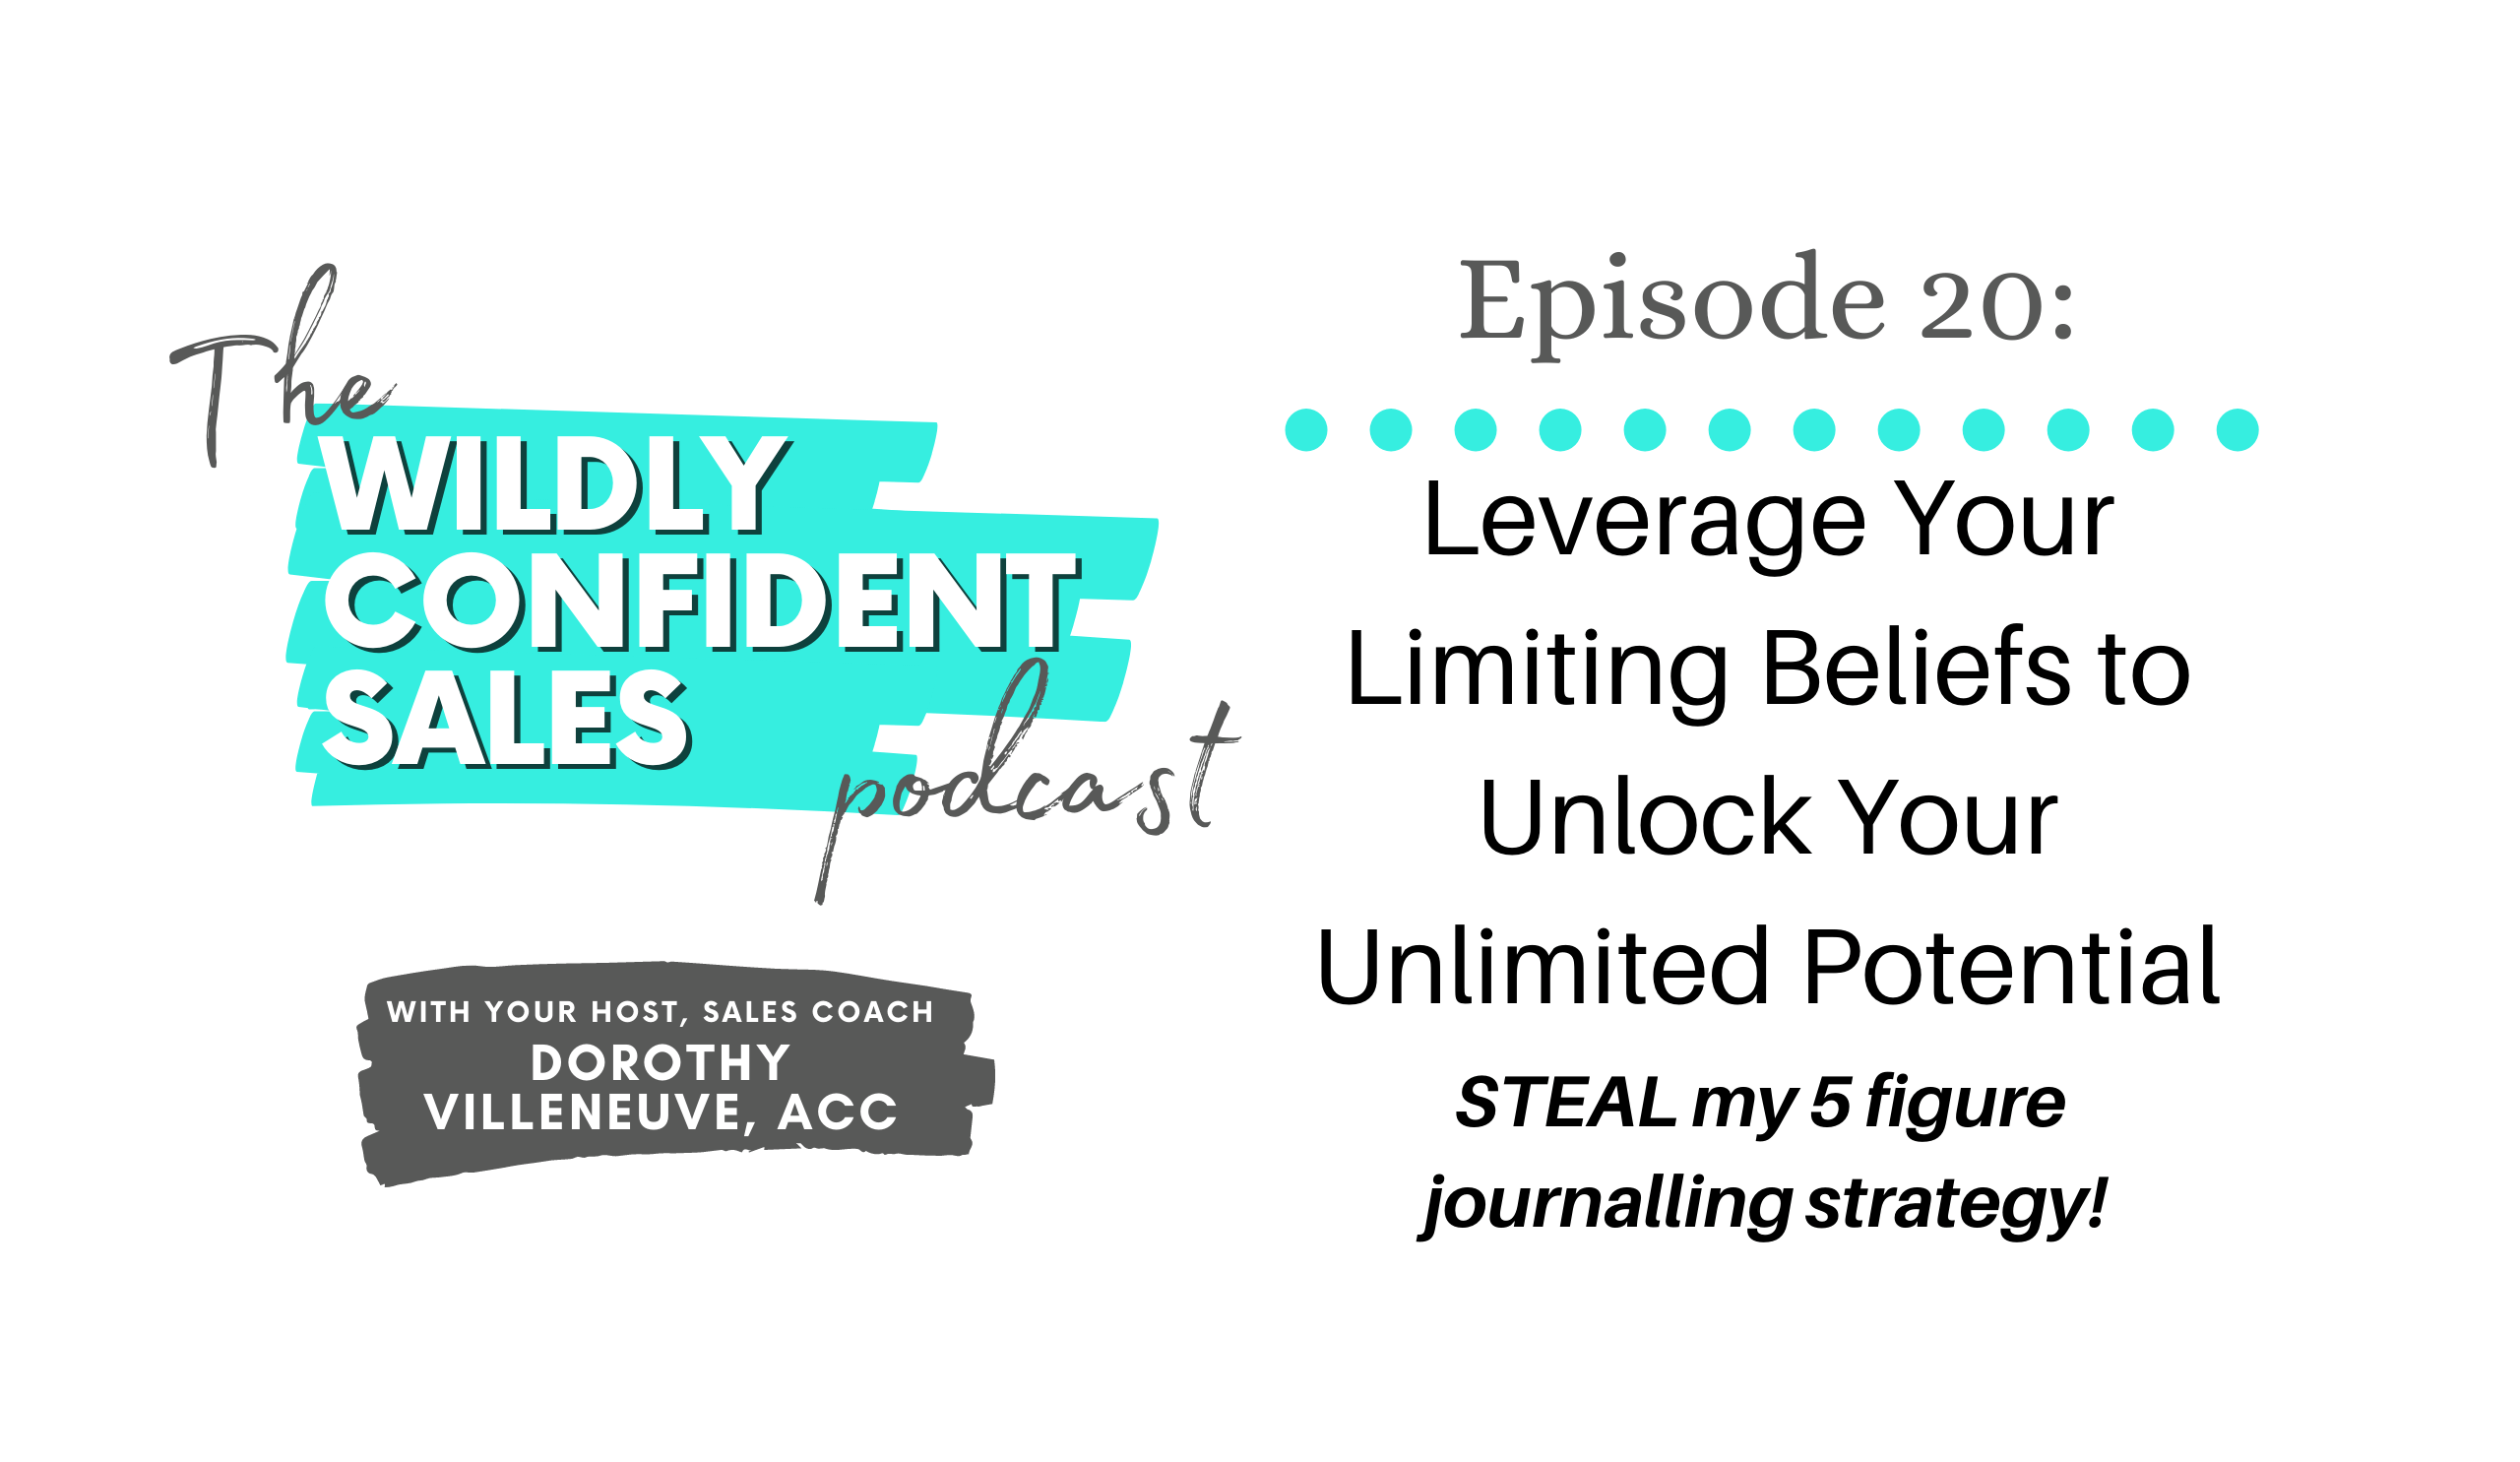 Leverage Your Limiting Beliefs to Unlock Your Unlimited Potential